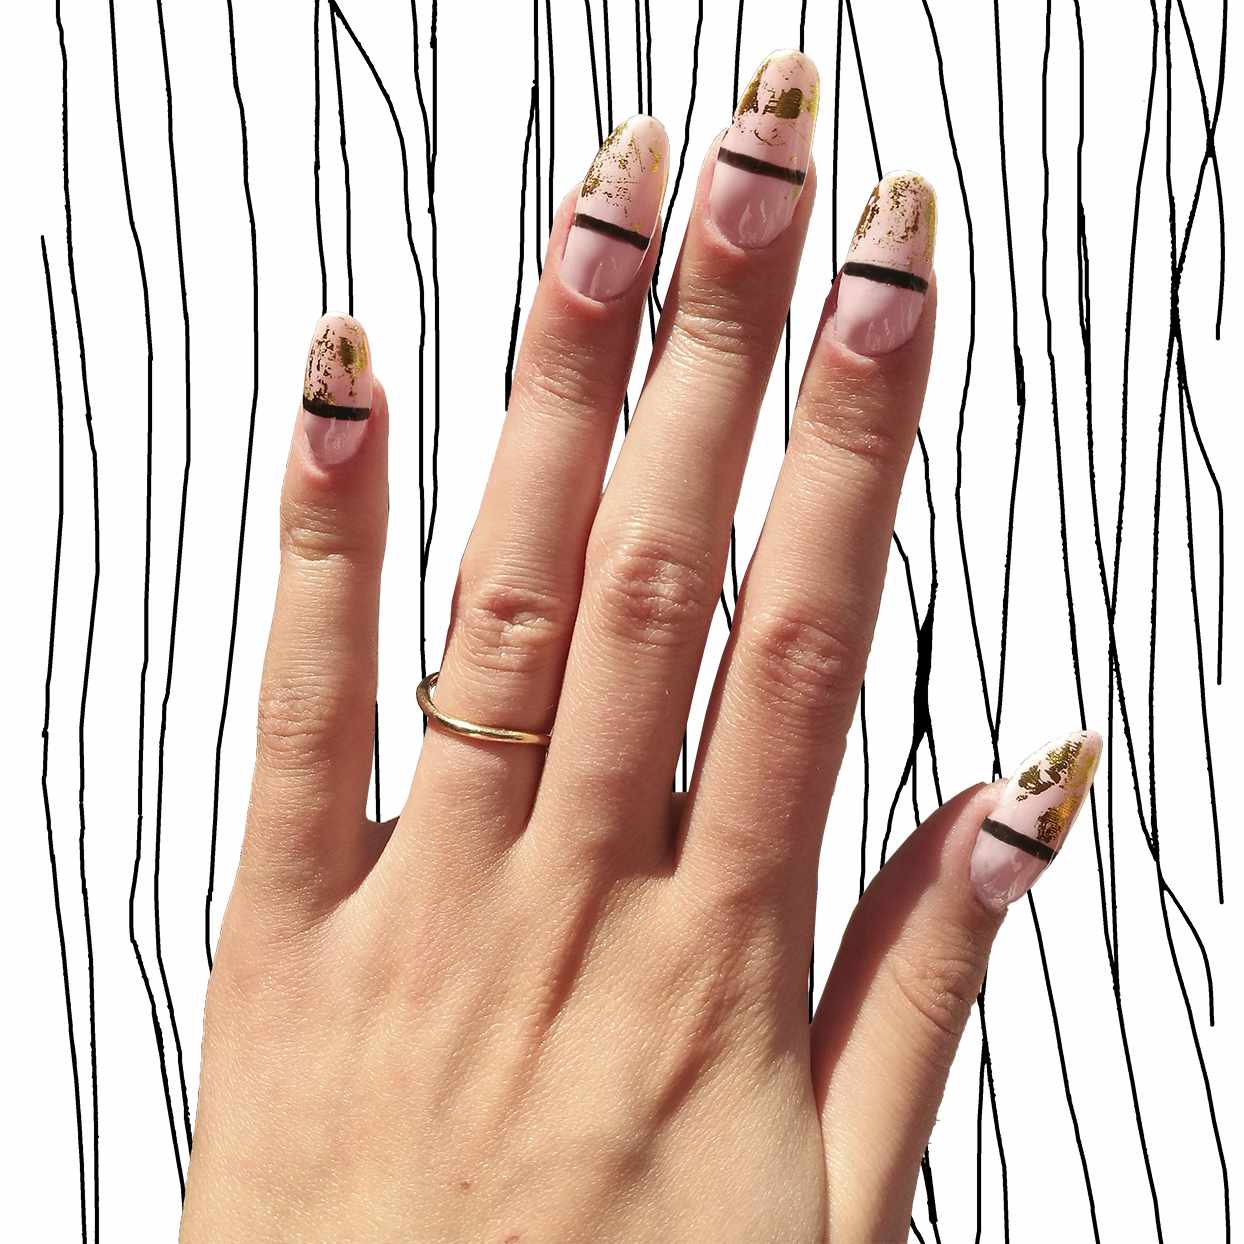 acrylic nails ready for at-home removal